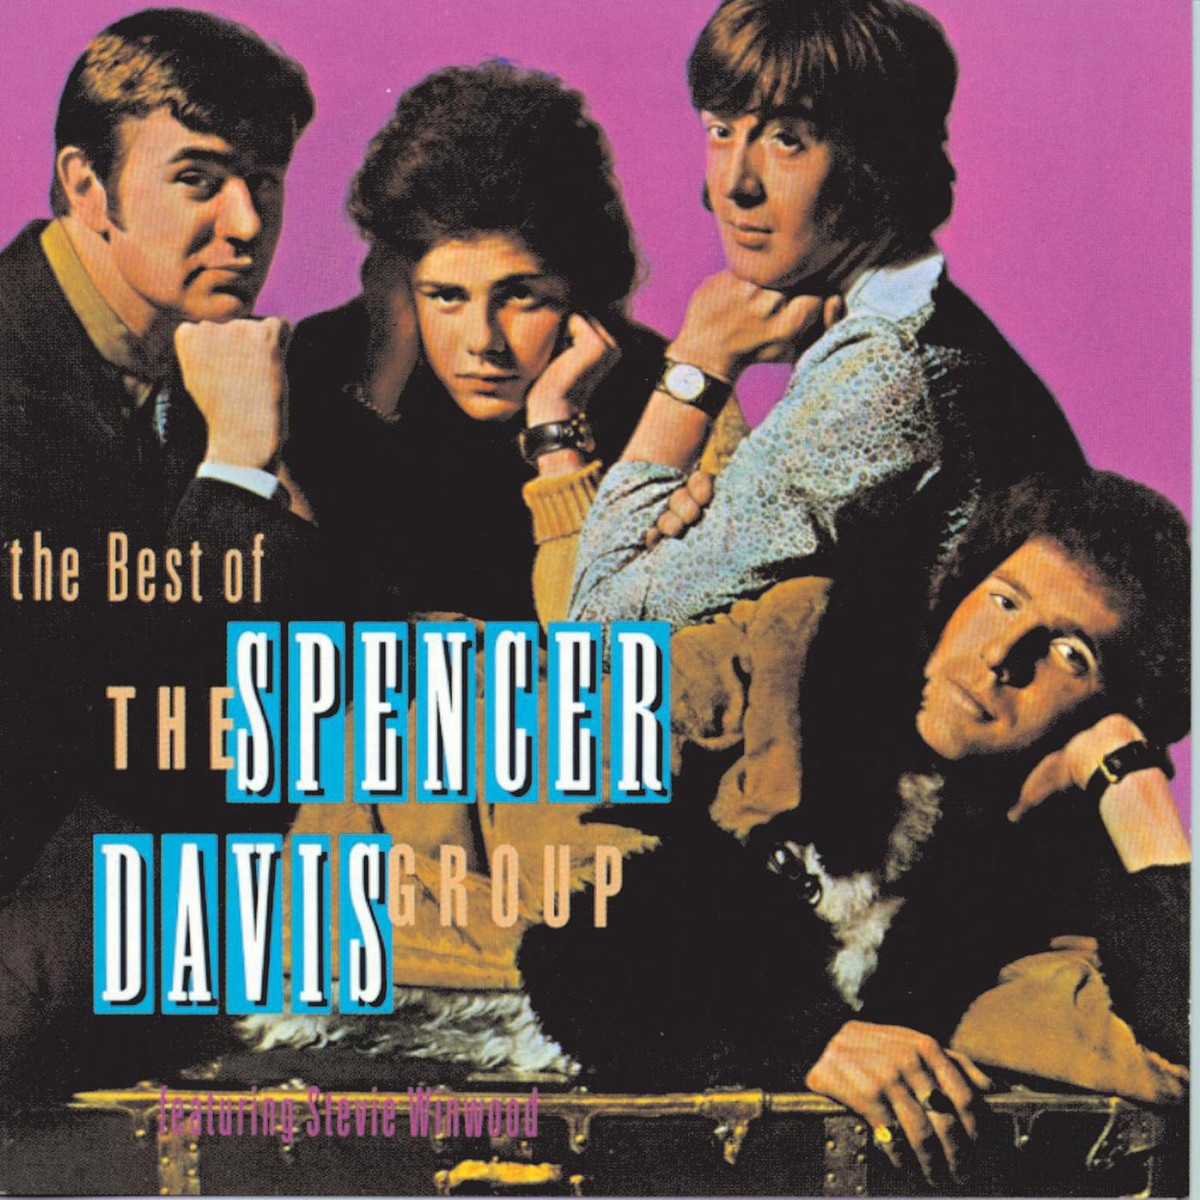 The Best of the Spencer Davis Group